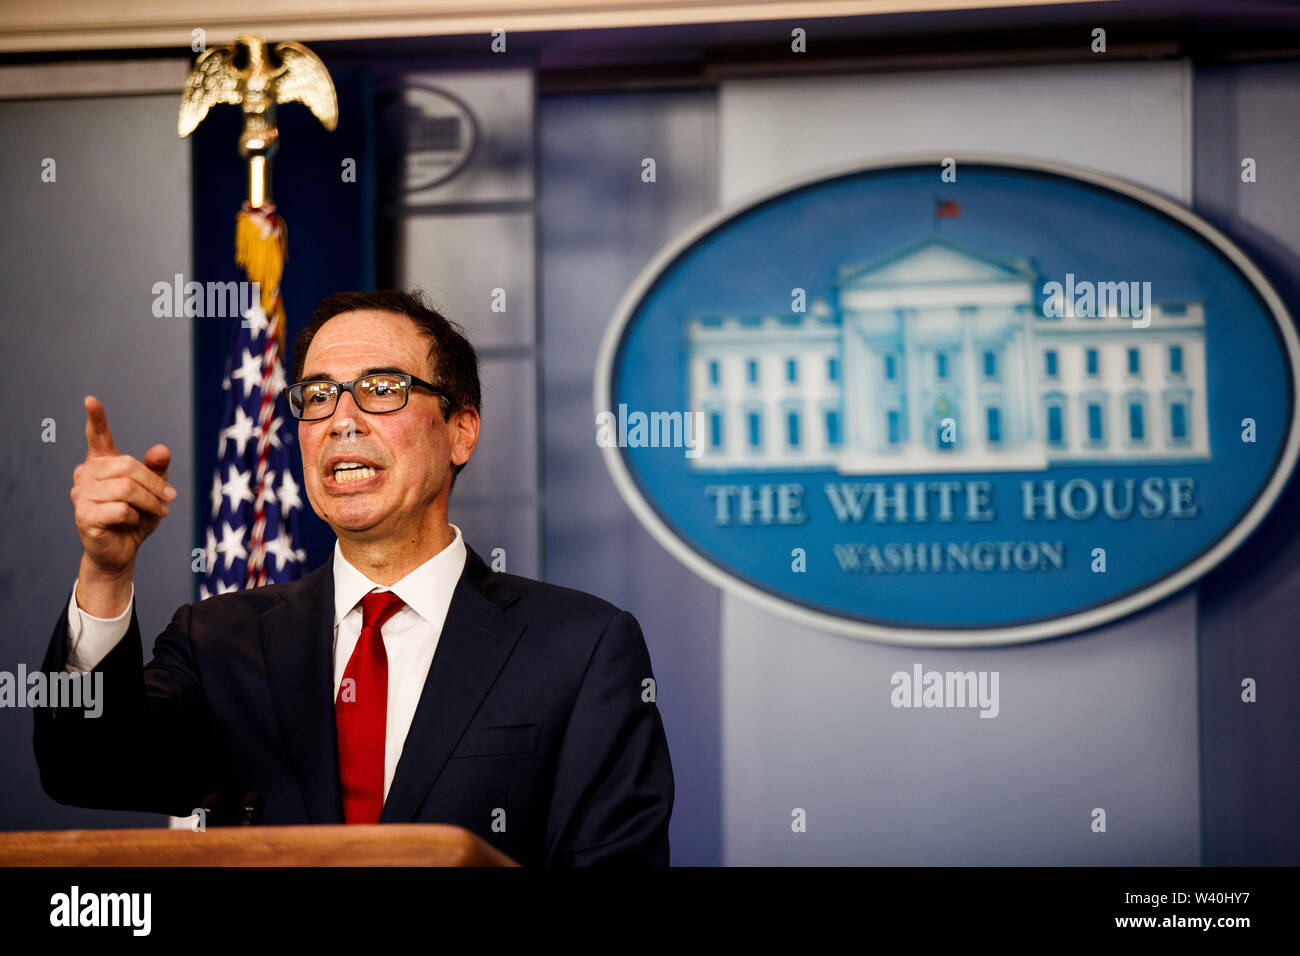 Washington, USA. 15th July, 2019. File photo taken on July 15, 2019 shows U.S. Treasury Secretary Steve Mnuchin speaking during a press briefing at the White House in Washington, DC, the United States. Steven Mnuchin said Thursday that discussions between the White House and Congress on raising the federal debt ceiling have made progress, and that the market shouldn't be concerned about the government defaulting on its payment obligations. Credit: Ting Shen/Xinhua/Alamy Live News Stock Photo